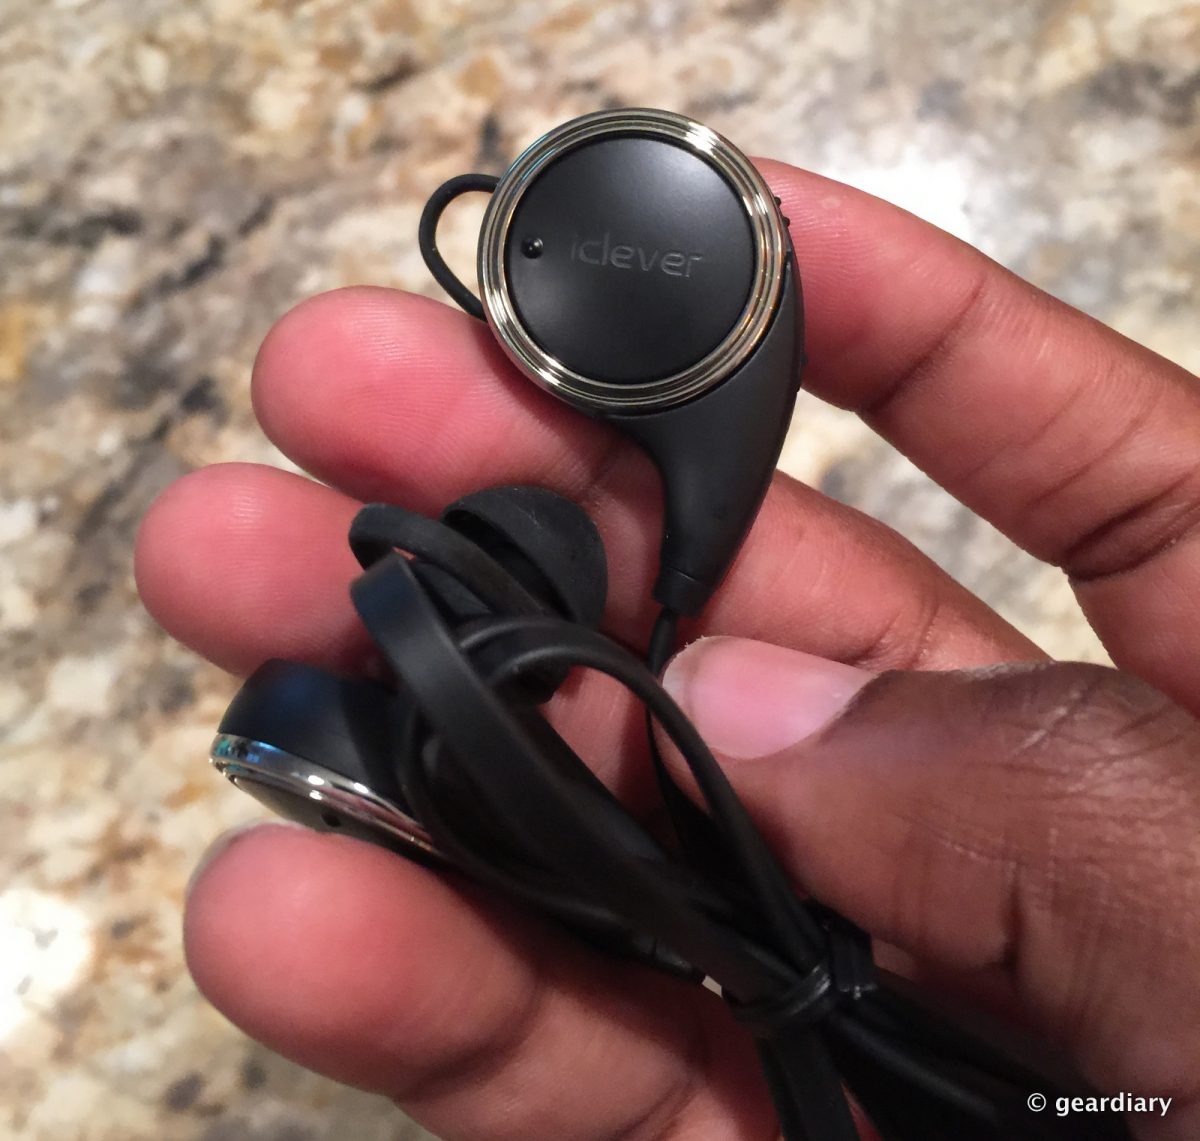 iClever's Budget Bluetooth Headphones Review: Affordable and Comfortable